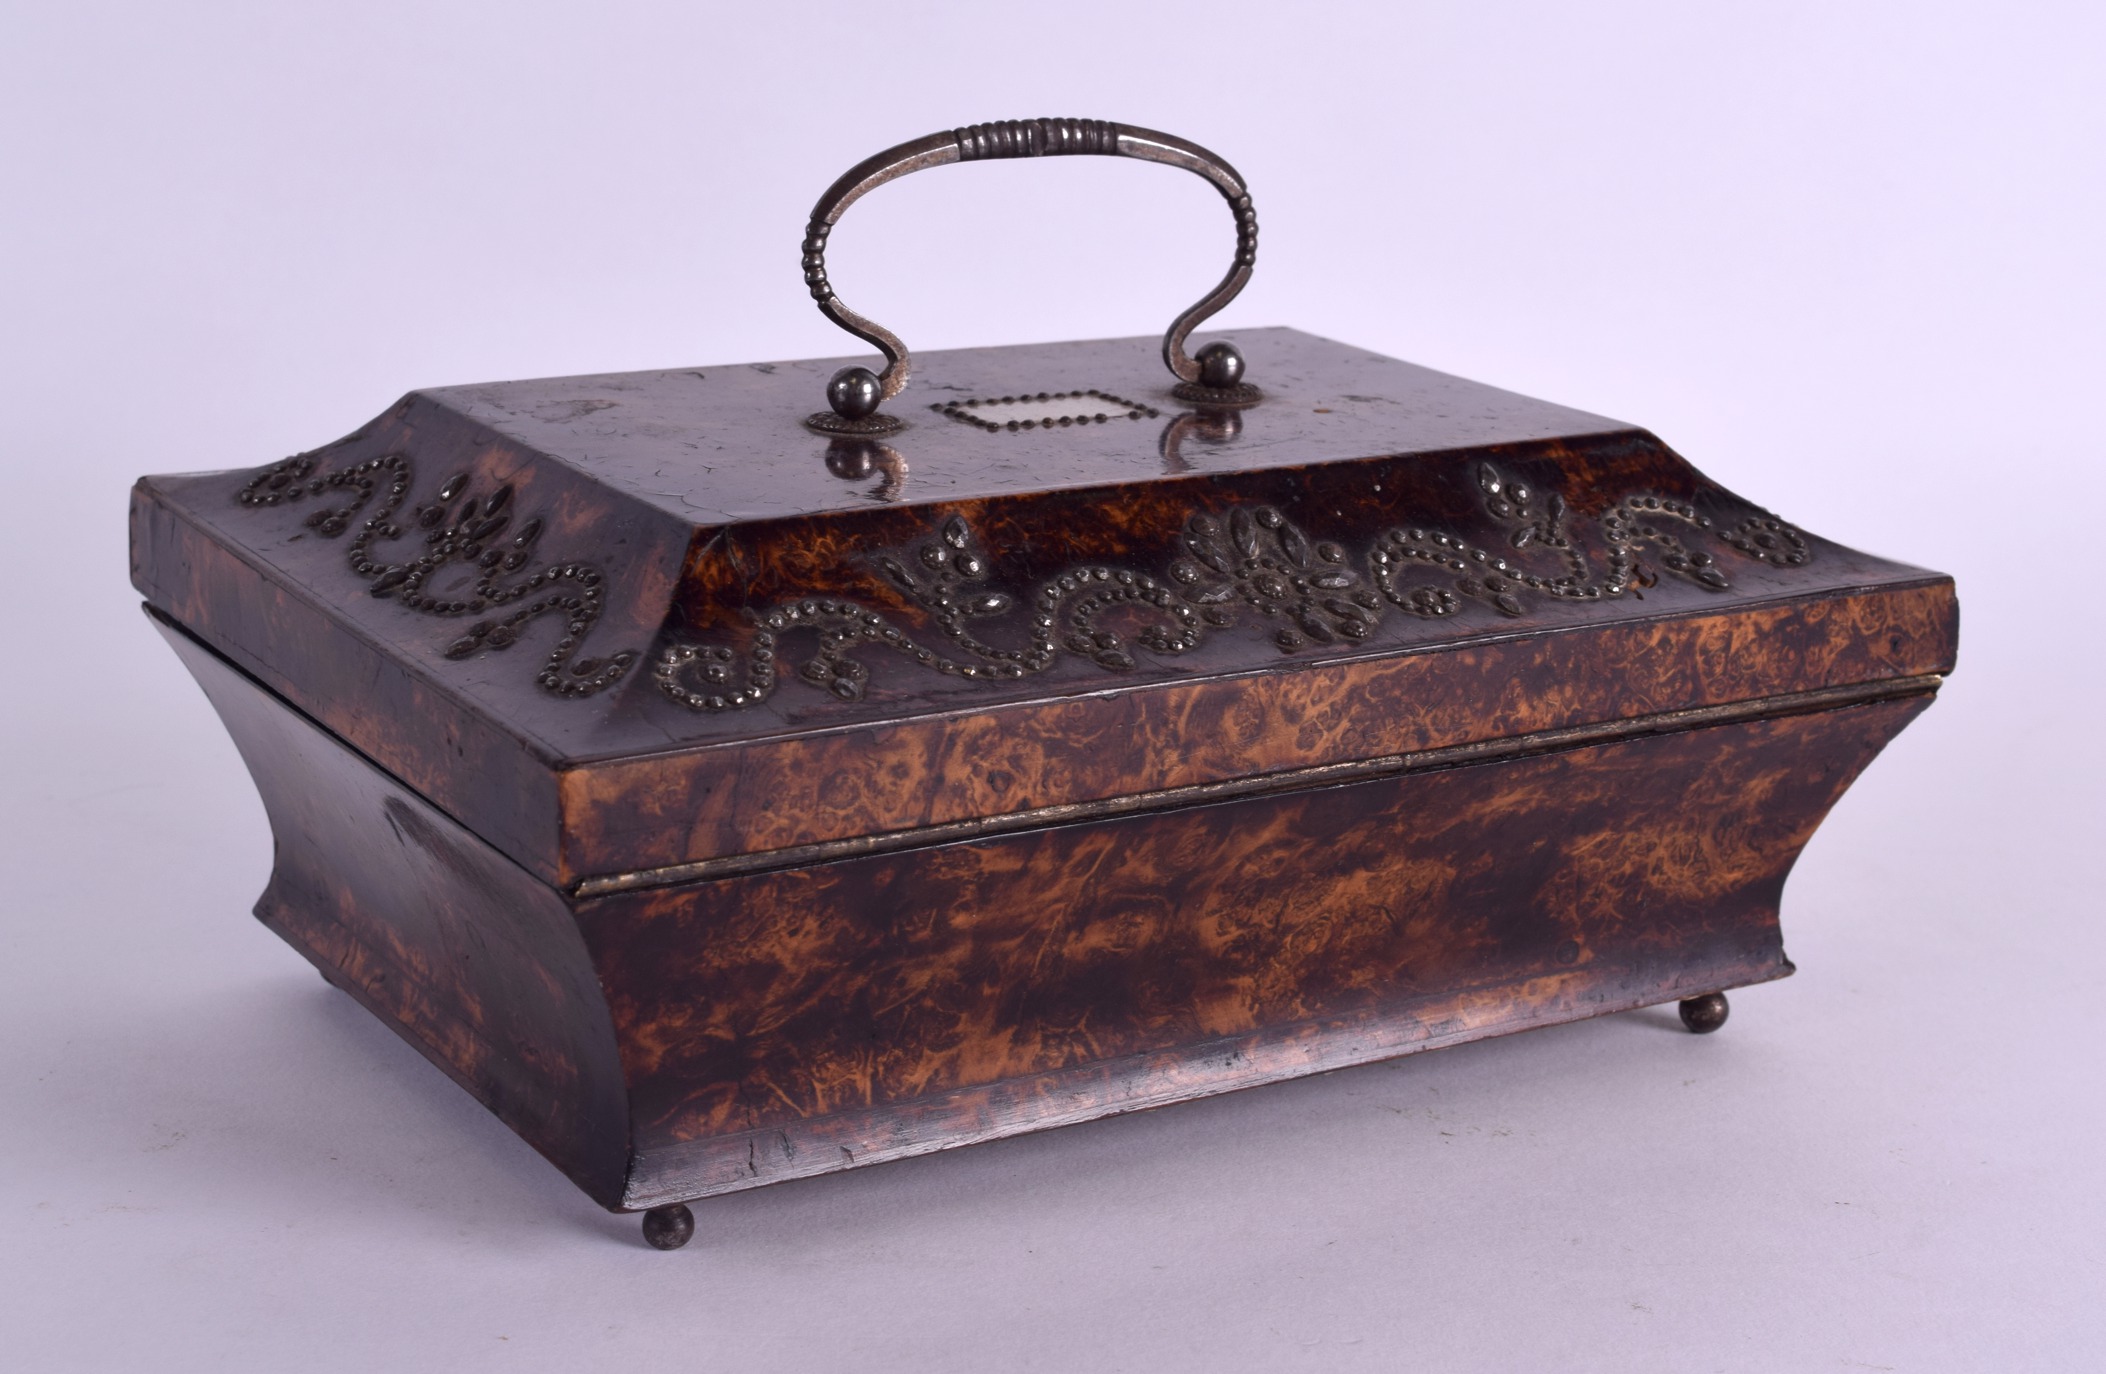 A LOVELY GEORGE III BURR WALNUT CUT STEEL WORK CASKET decorated with floral motifs and swirls. 19 cm - Image 2 of 4